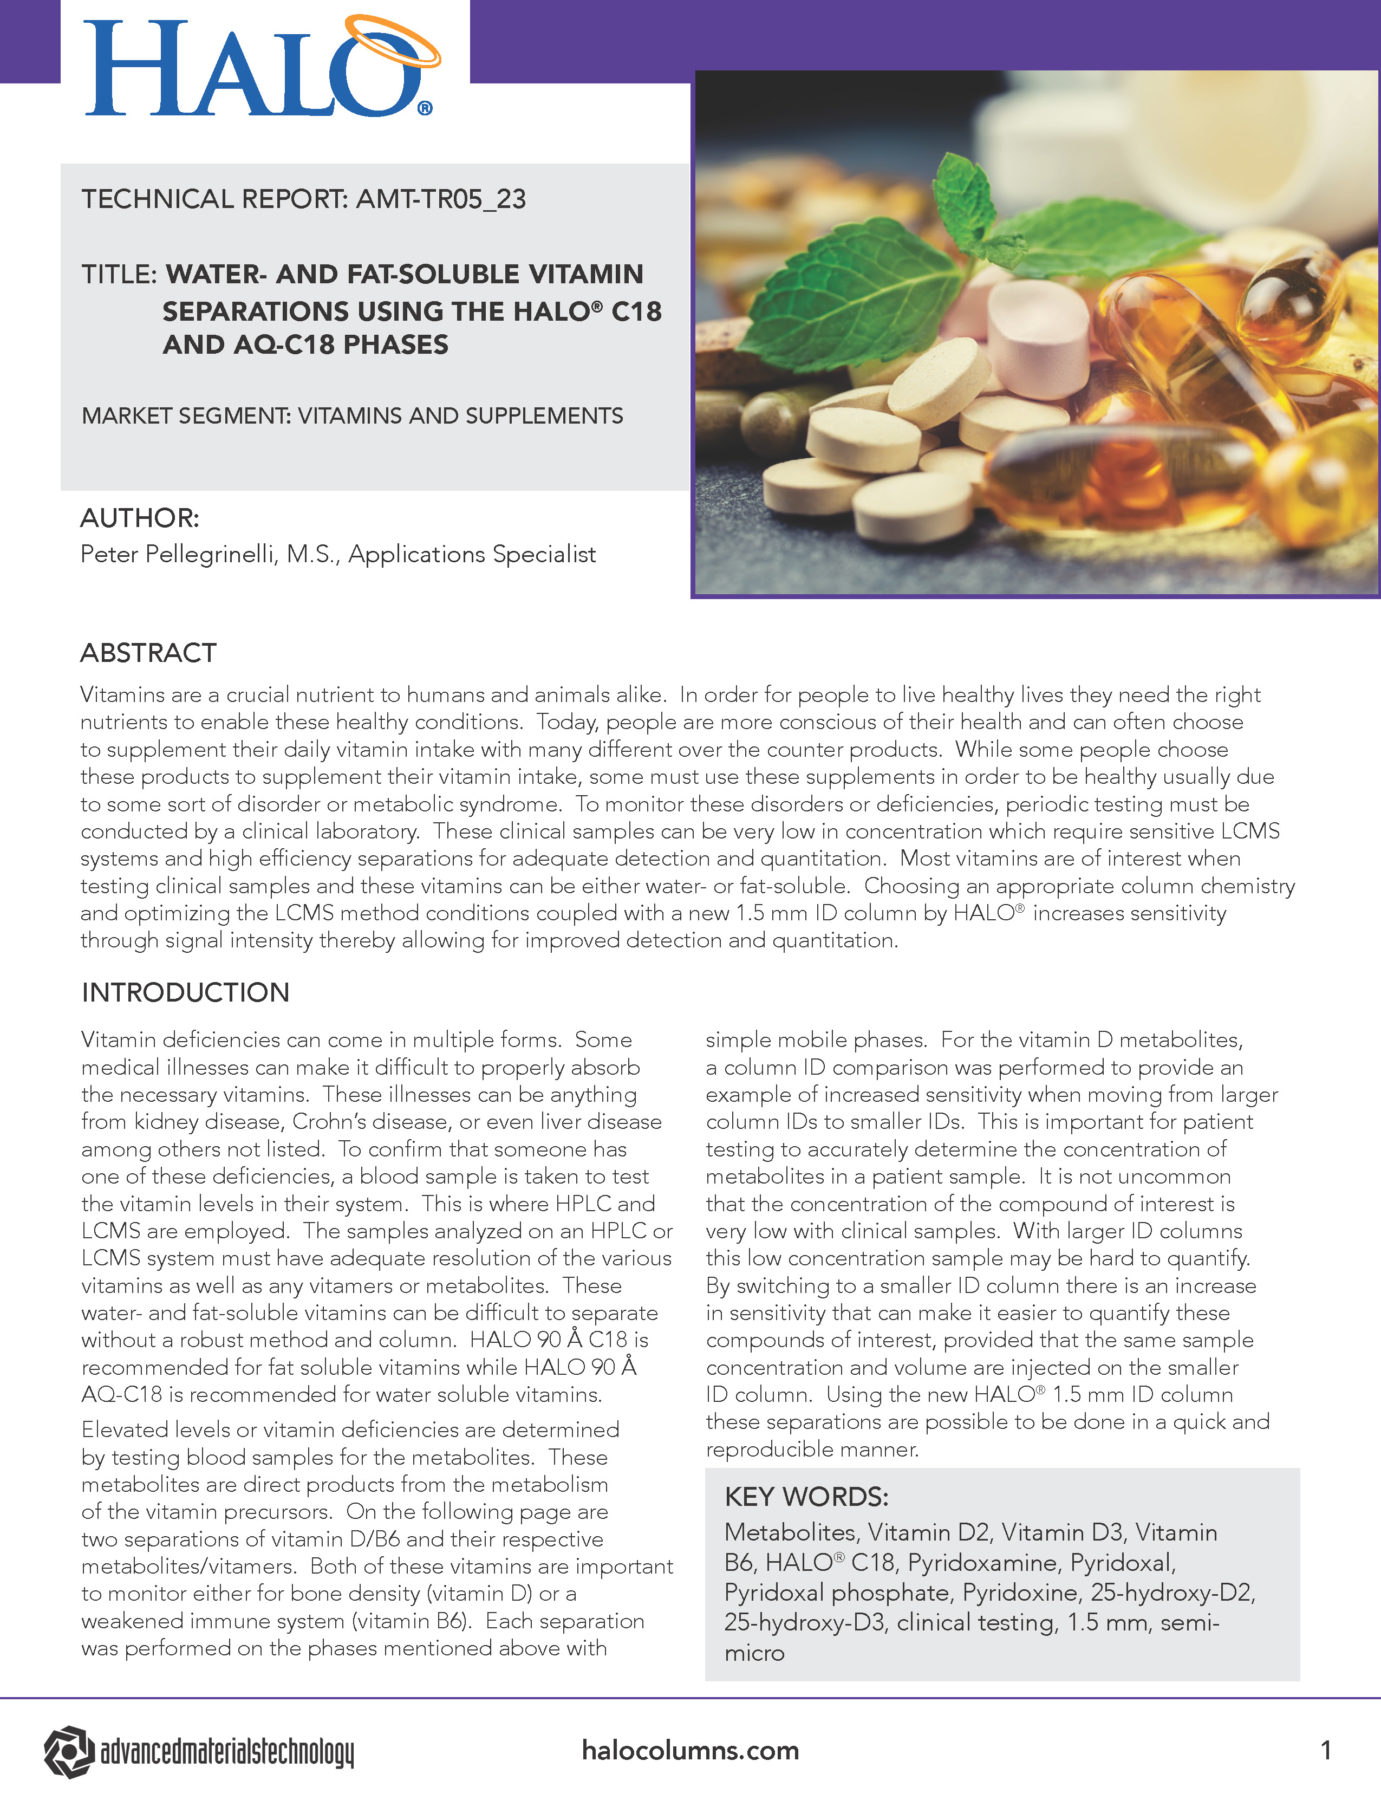 water and fat-soluable vitamin seperations using the HALO C18 and AQ-C18 Phases